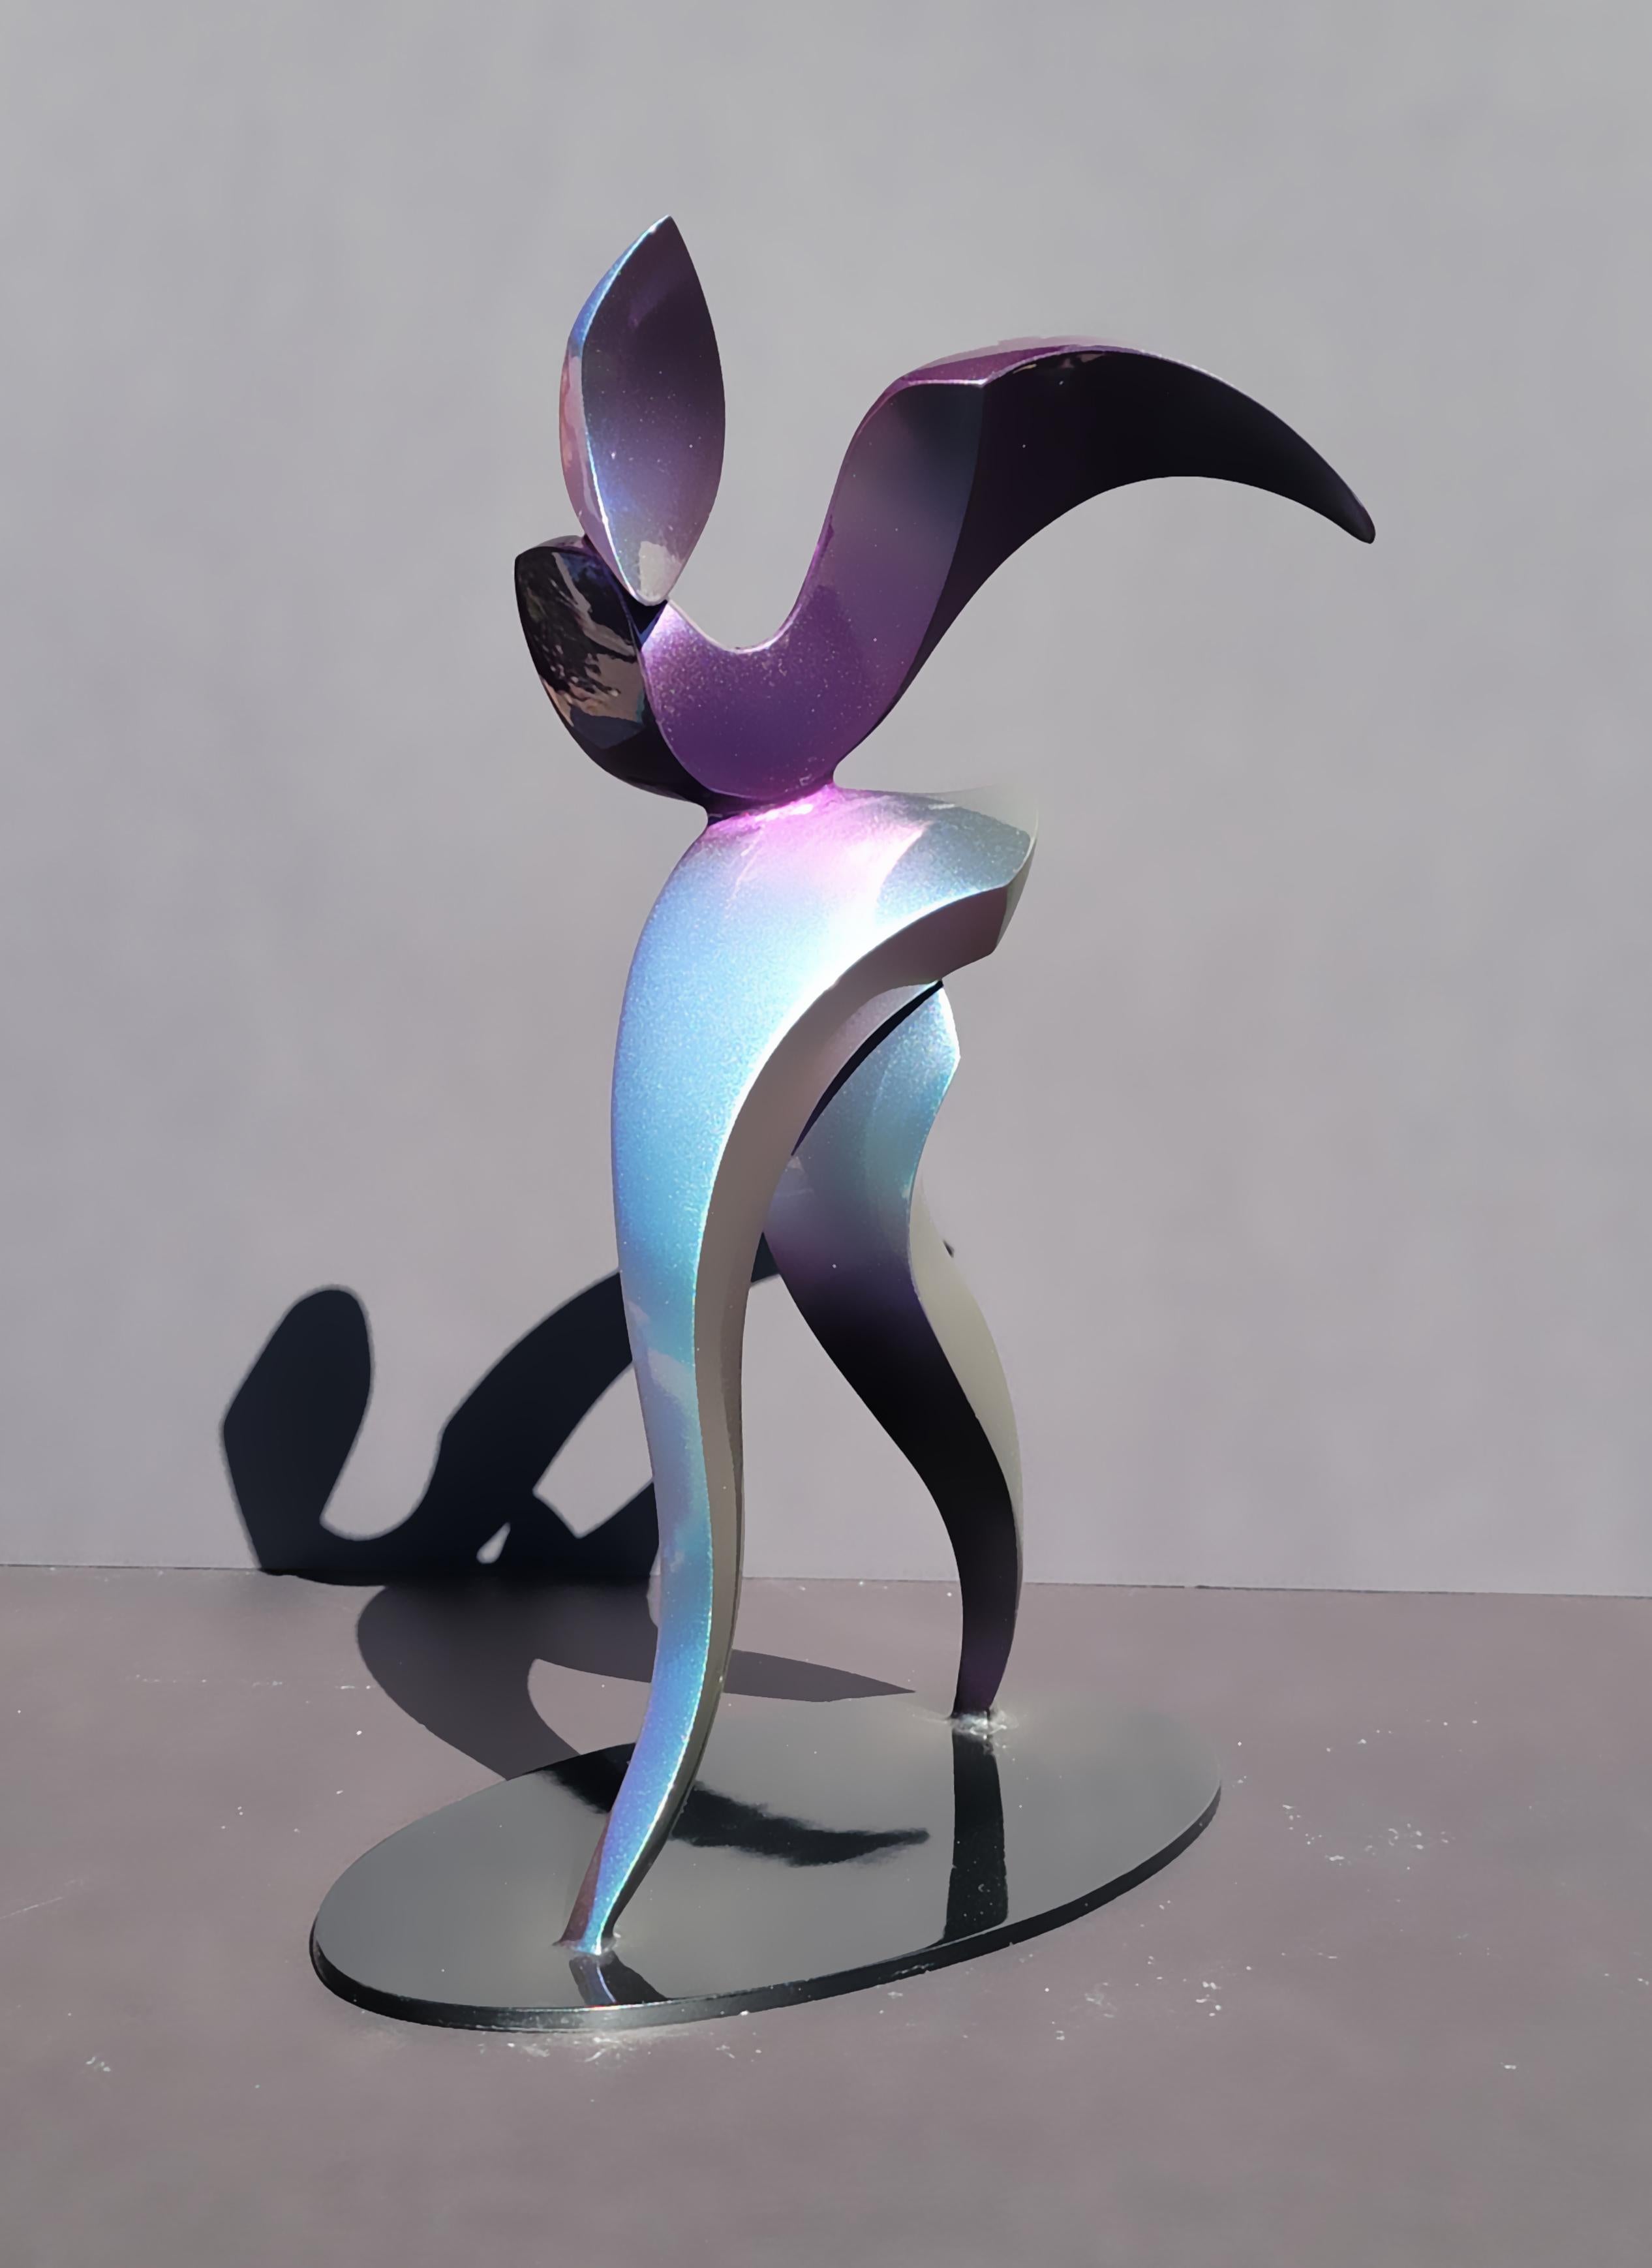 Cast in aluminum and painted with magenta-jade color this biomorphic figure seems in motion and color shifts depending on point of view and ambient lighting. This is an edition of 12 and is available in other colors or brushed aluminum.